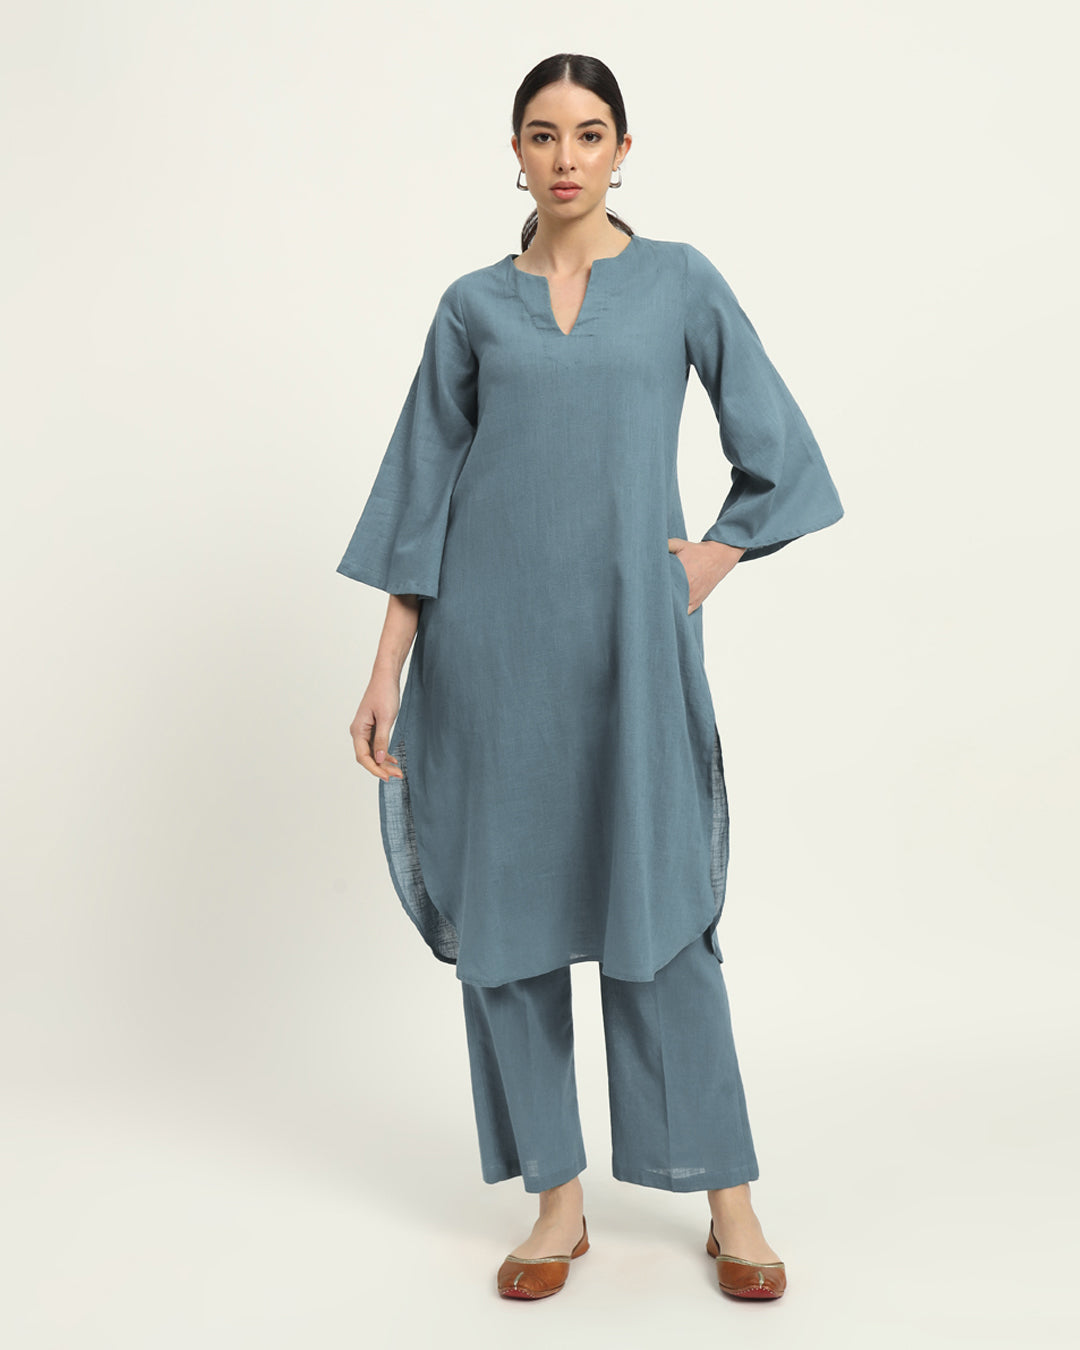 Combo: Blue Dawn & Iris Pink Rounded Reverie Solid Kurta